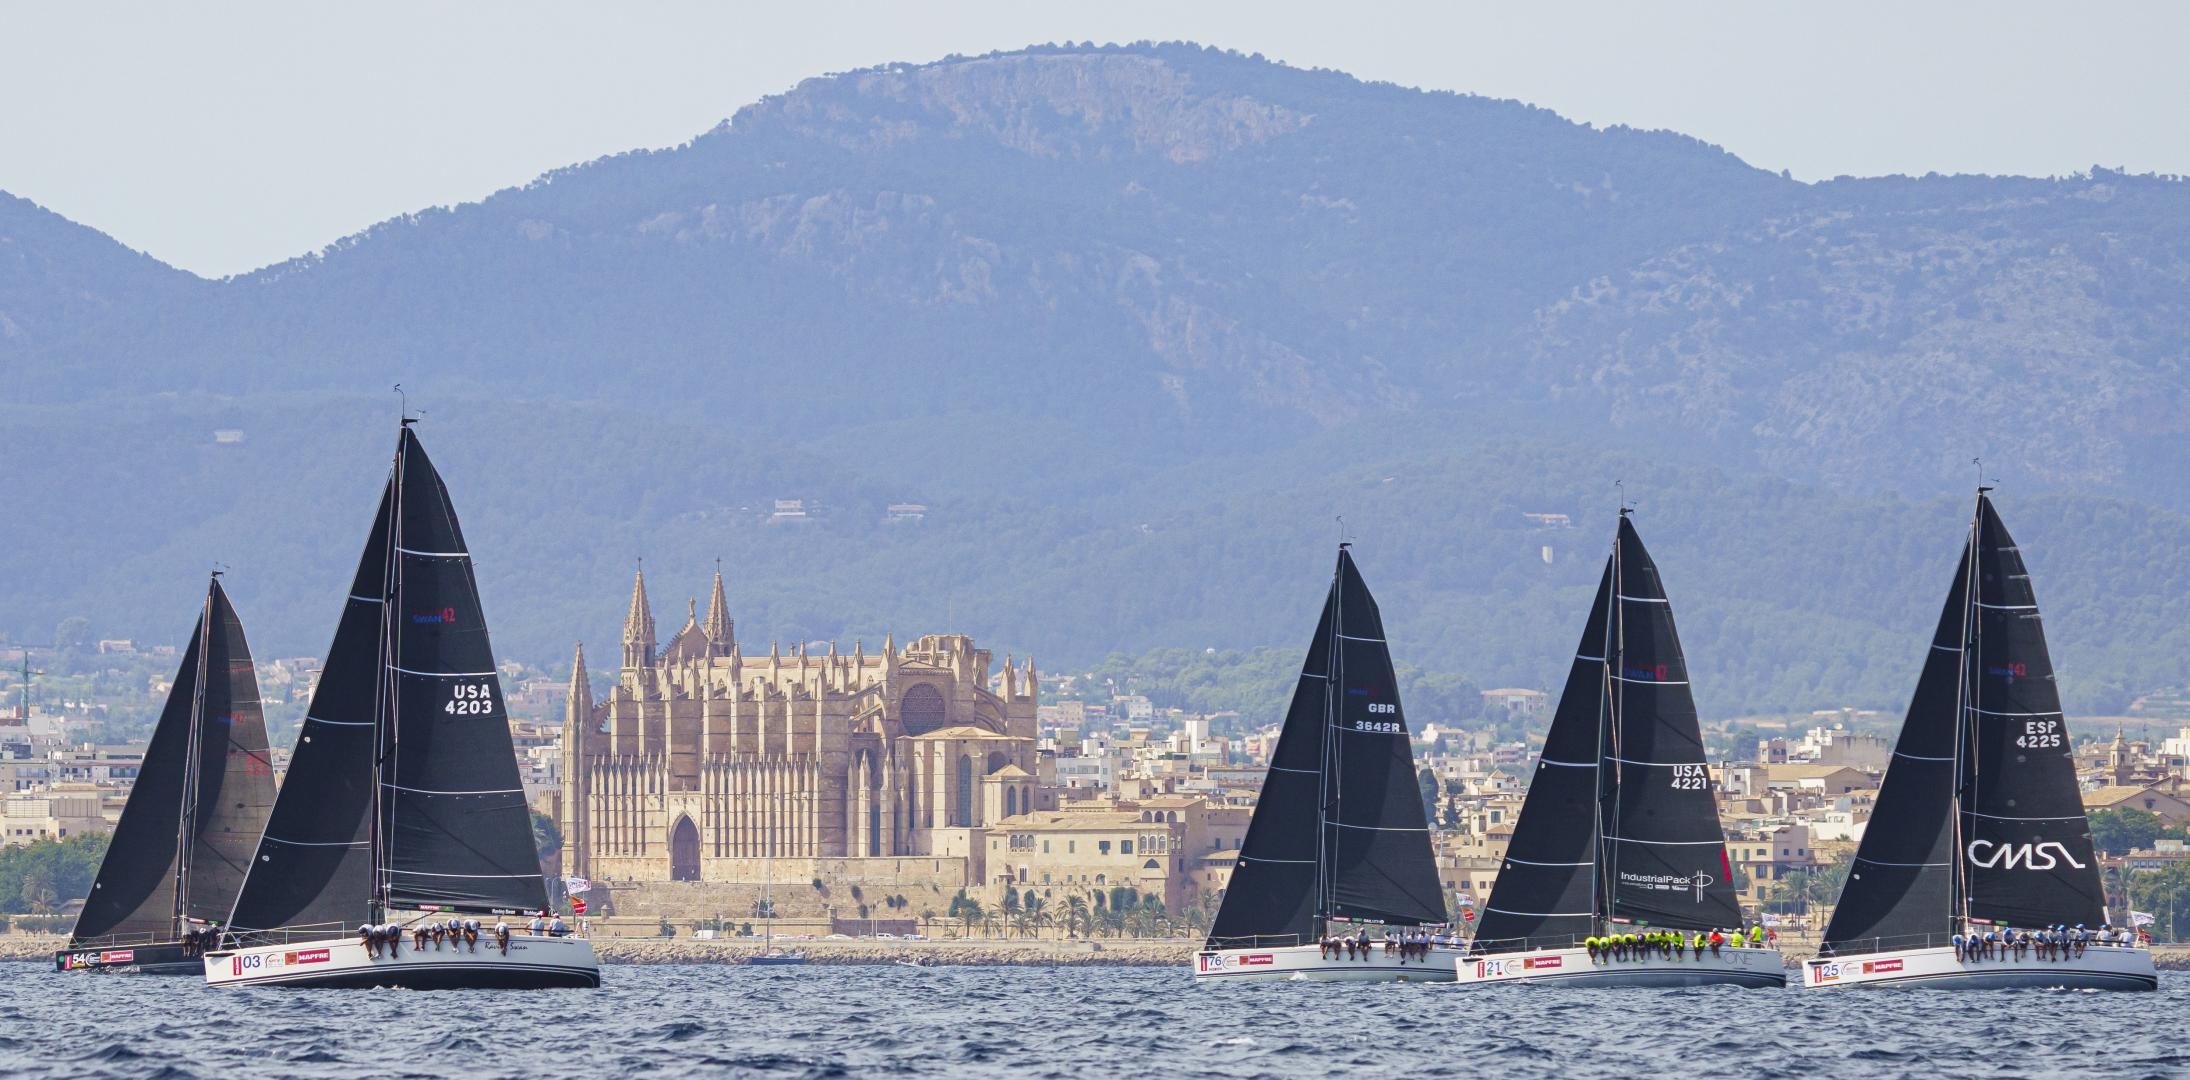 ClubSwan yachts at the 39th Copa del Rey in Palma de Mallorca